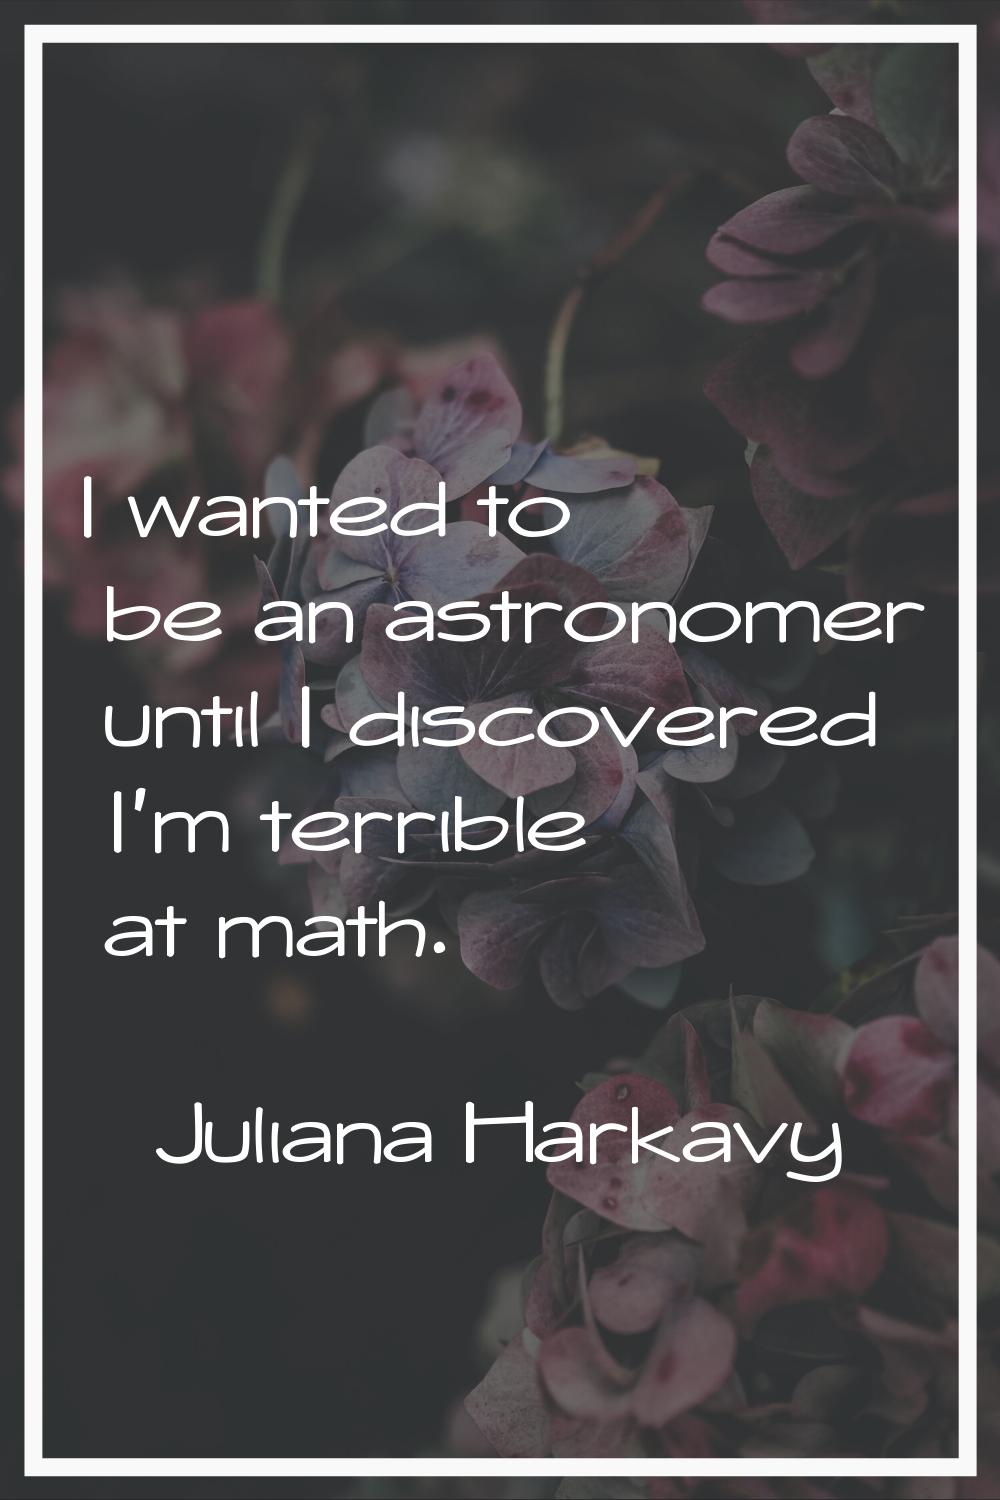 I wanted to be an astronomer until I discovered I'm terrible at math.